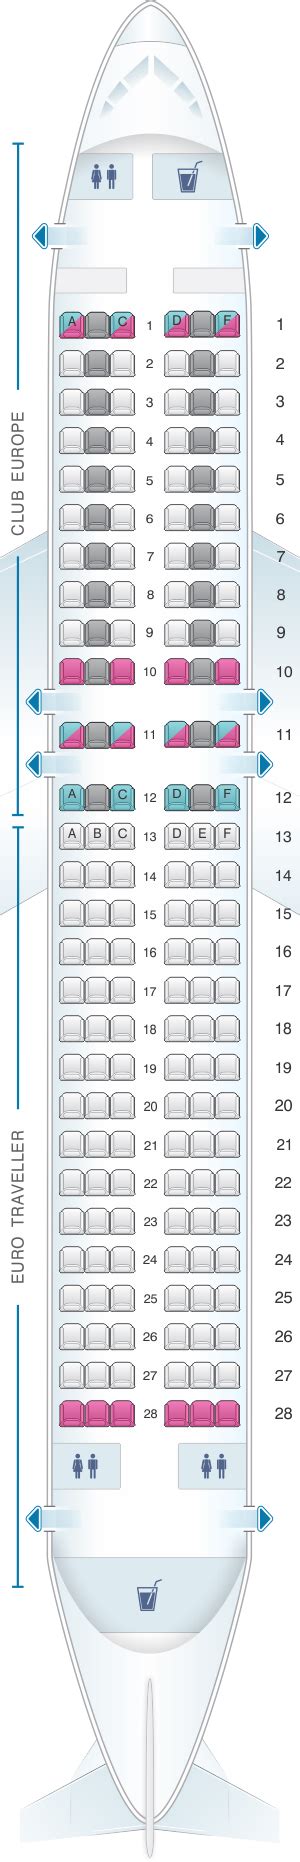 ba  seating plan hot sex picture